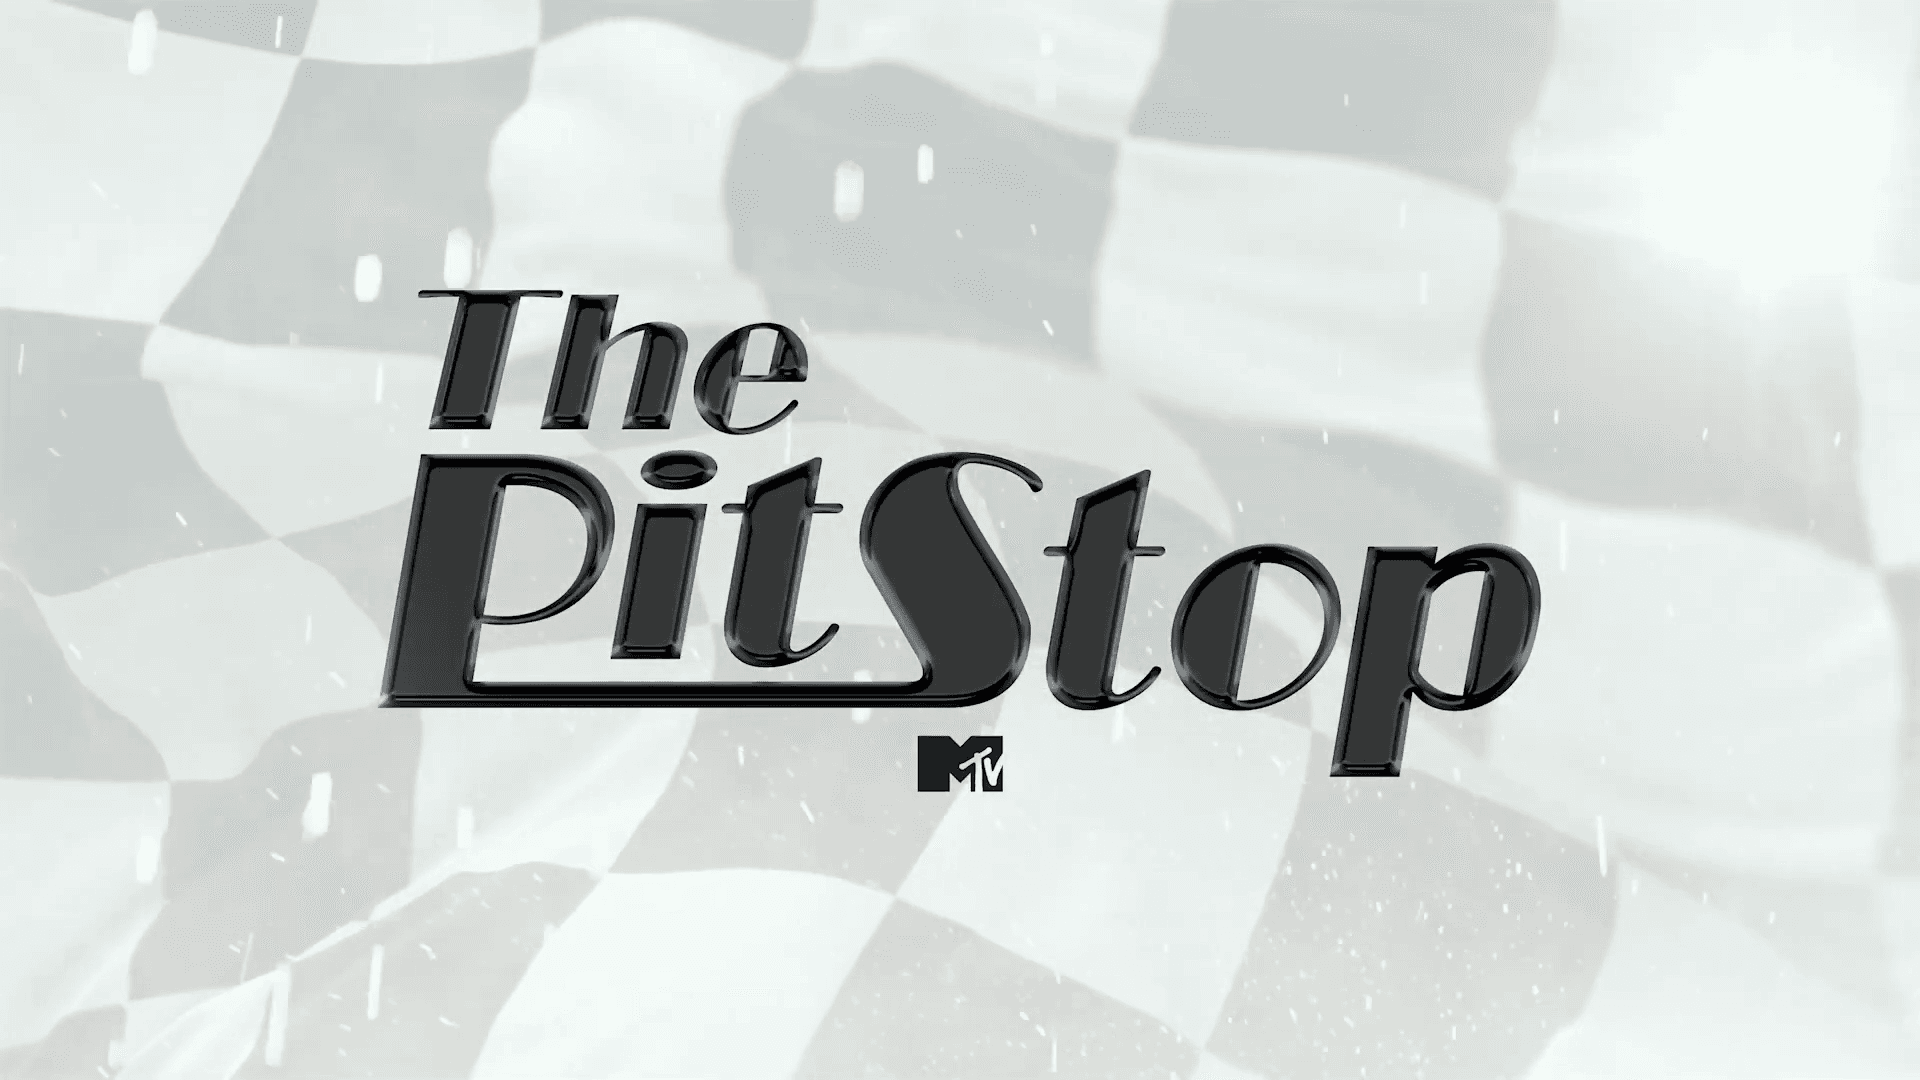 The Pit Stop